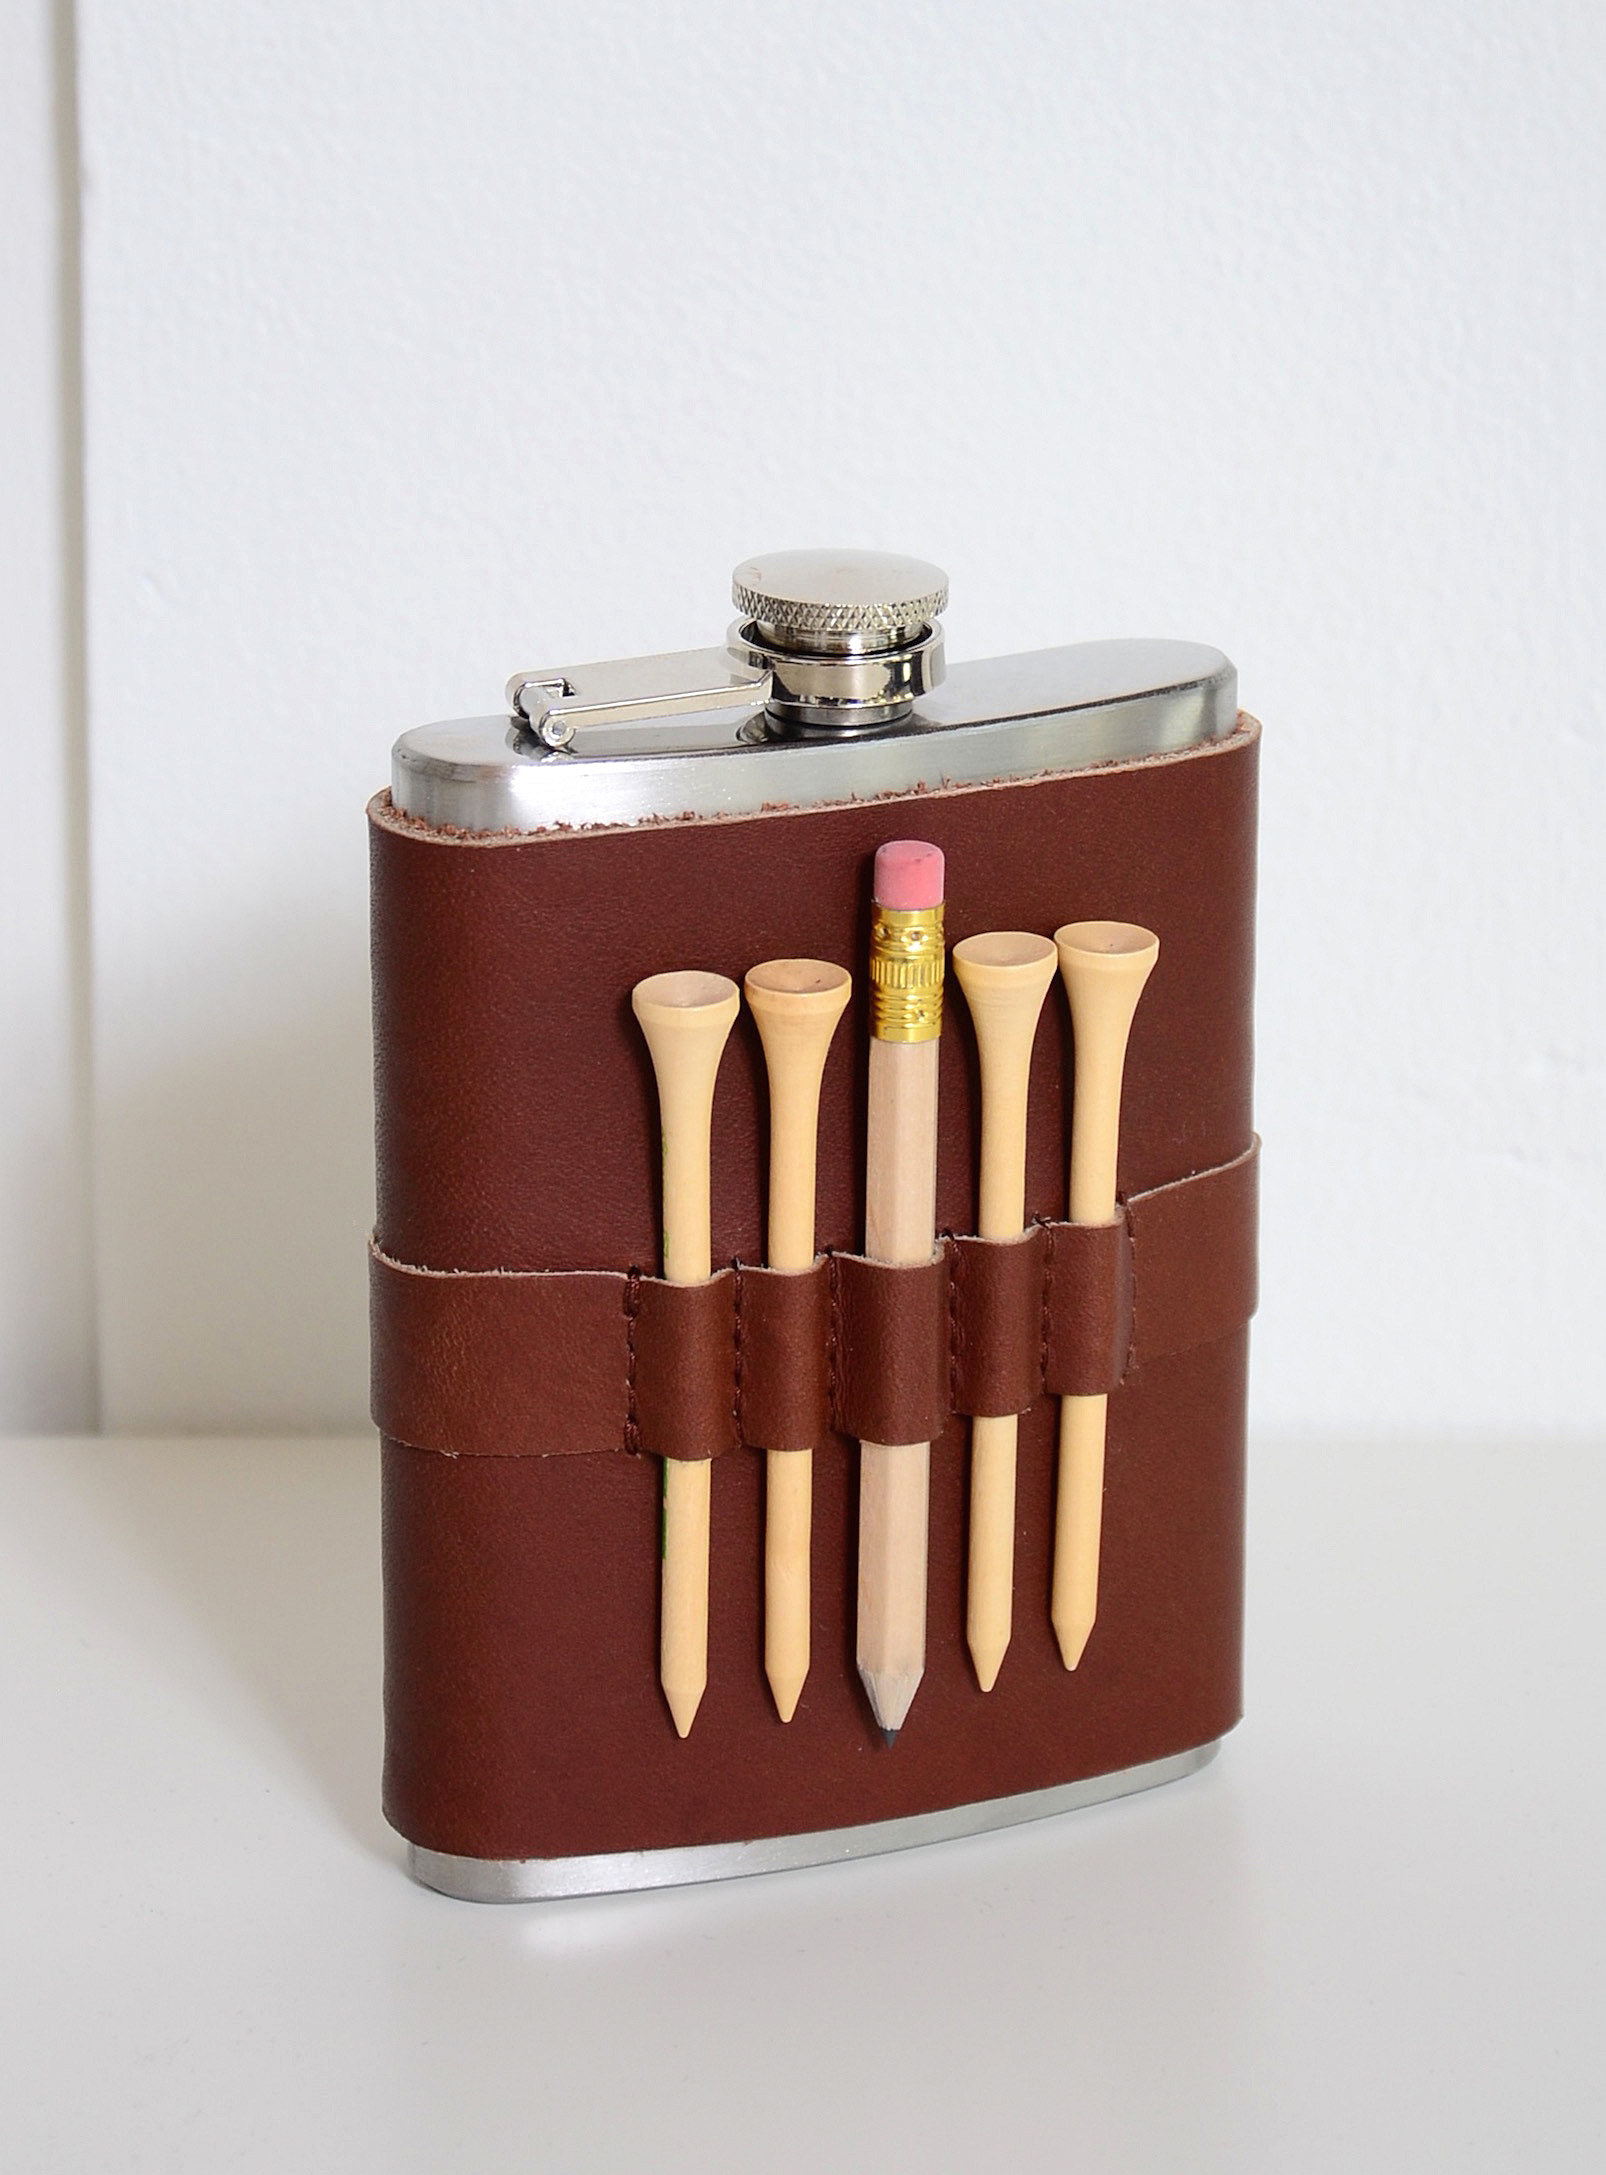 the flask with a pencil and four tees